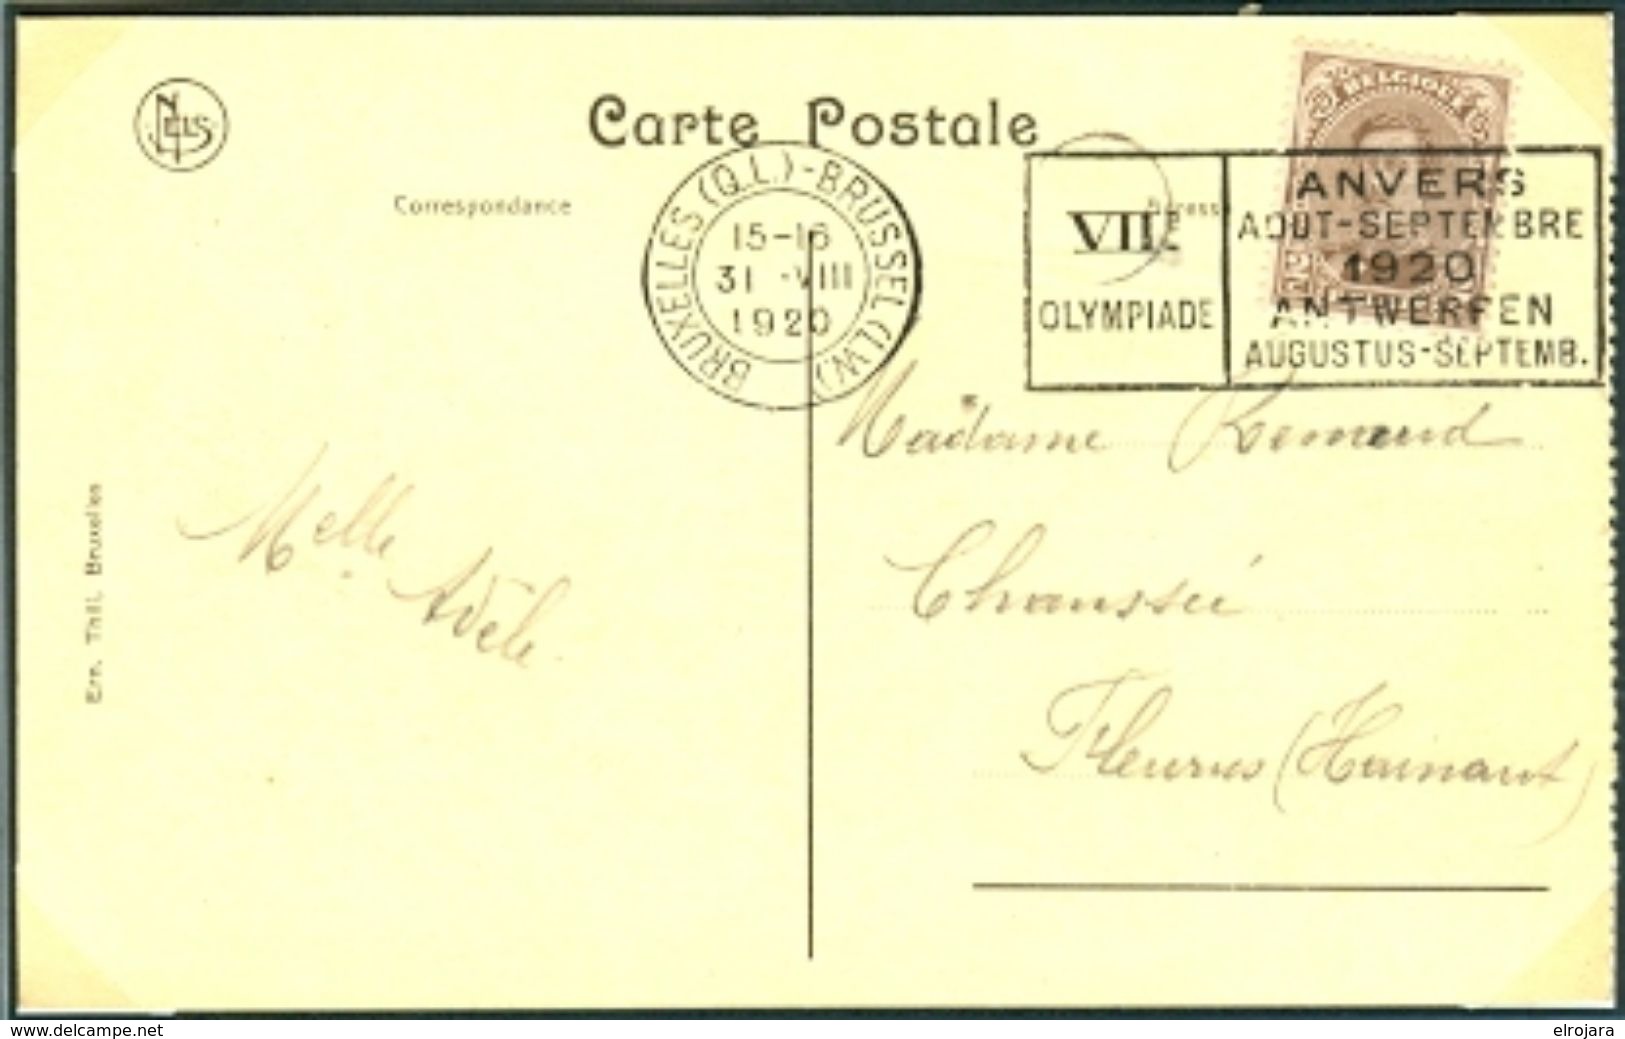 BELGIUM Postcard With Olympic Machine Cancel Bruxelles QL Brussel LW Dated 31-VIII 1920 Soccer Day - Summer 1920: Antwerp